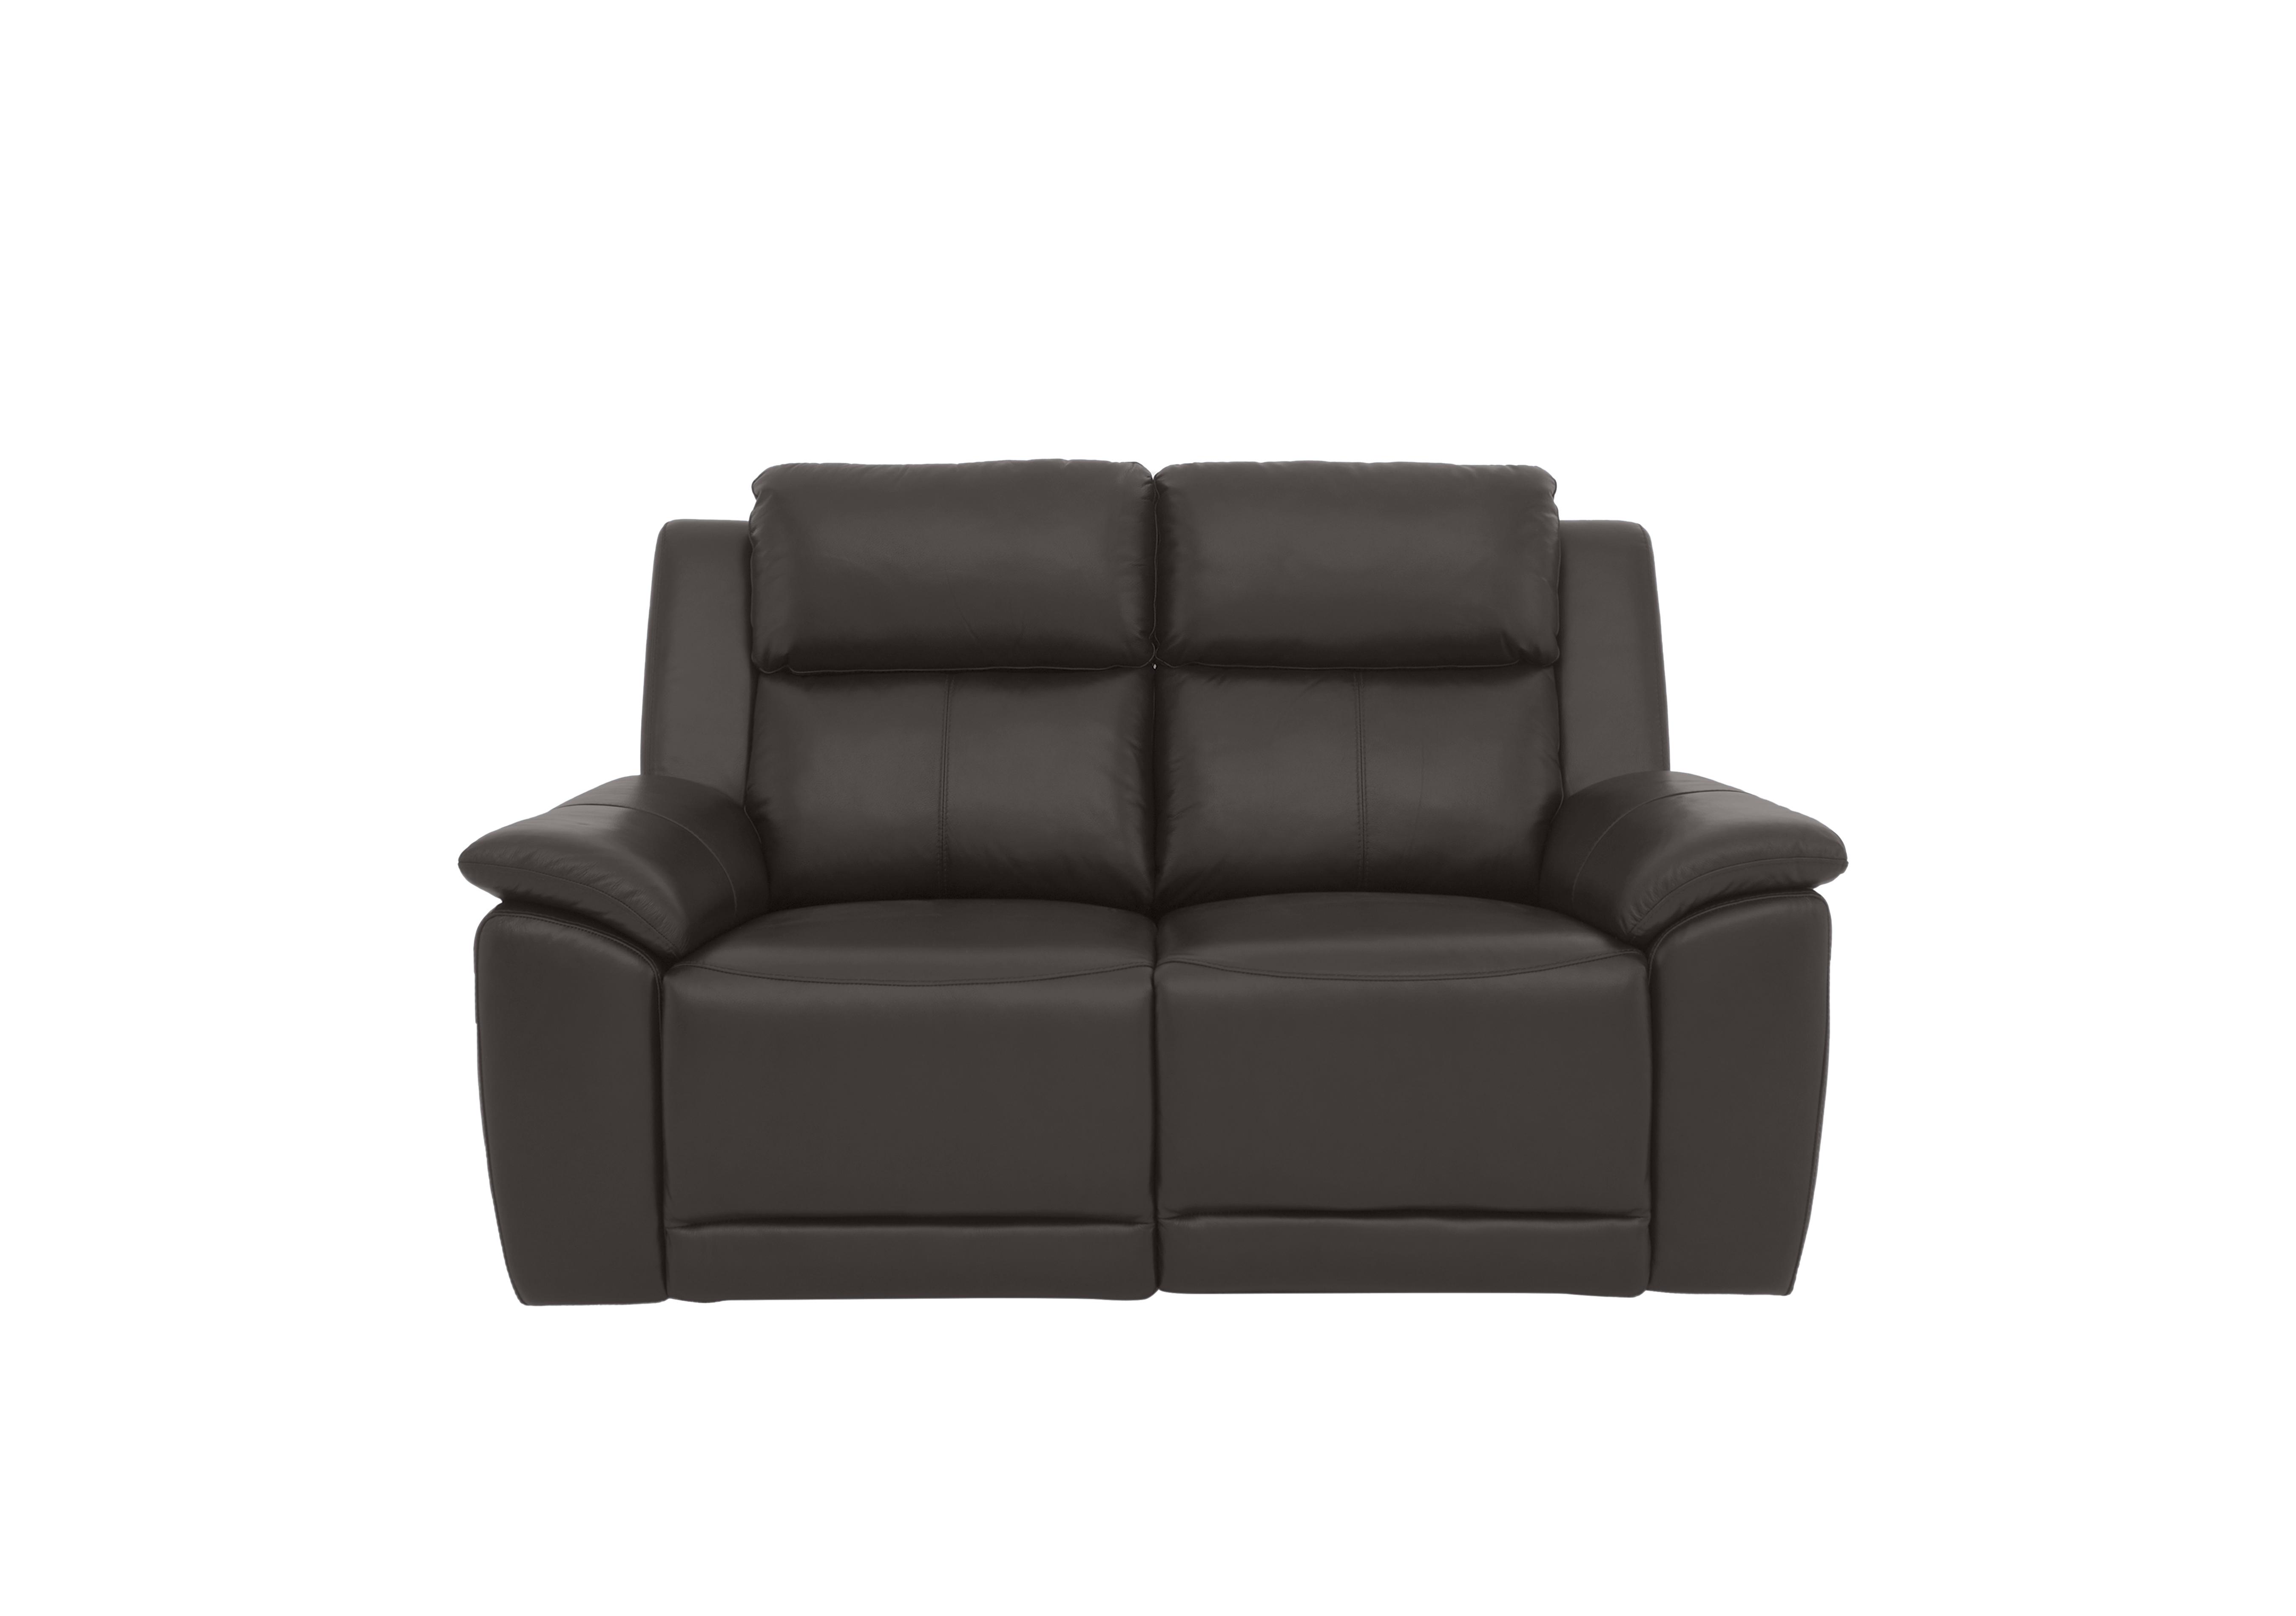 Utah 2 Seater Leather Power Recliner Sofa with Power Headrests and Power Lumbar in Piompo Lx-6404 on Furniture Village